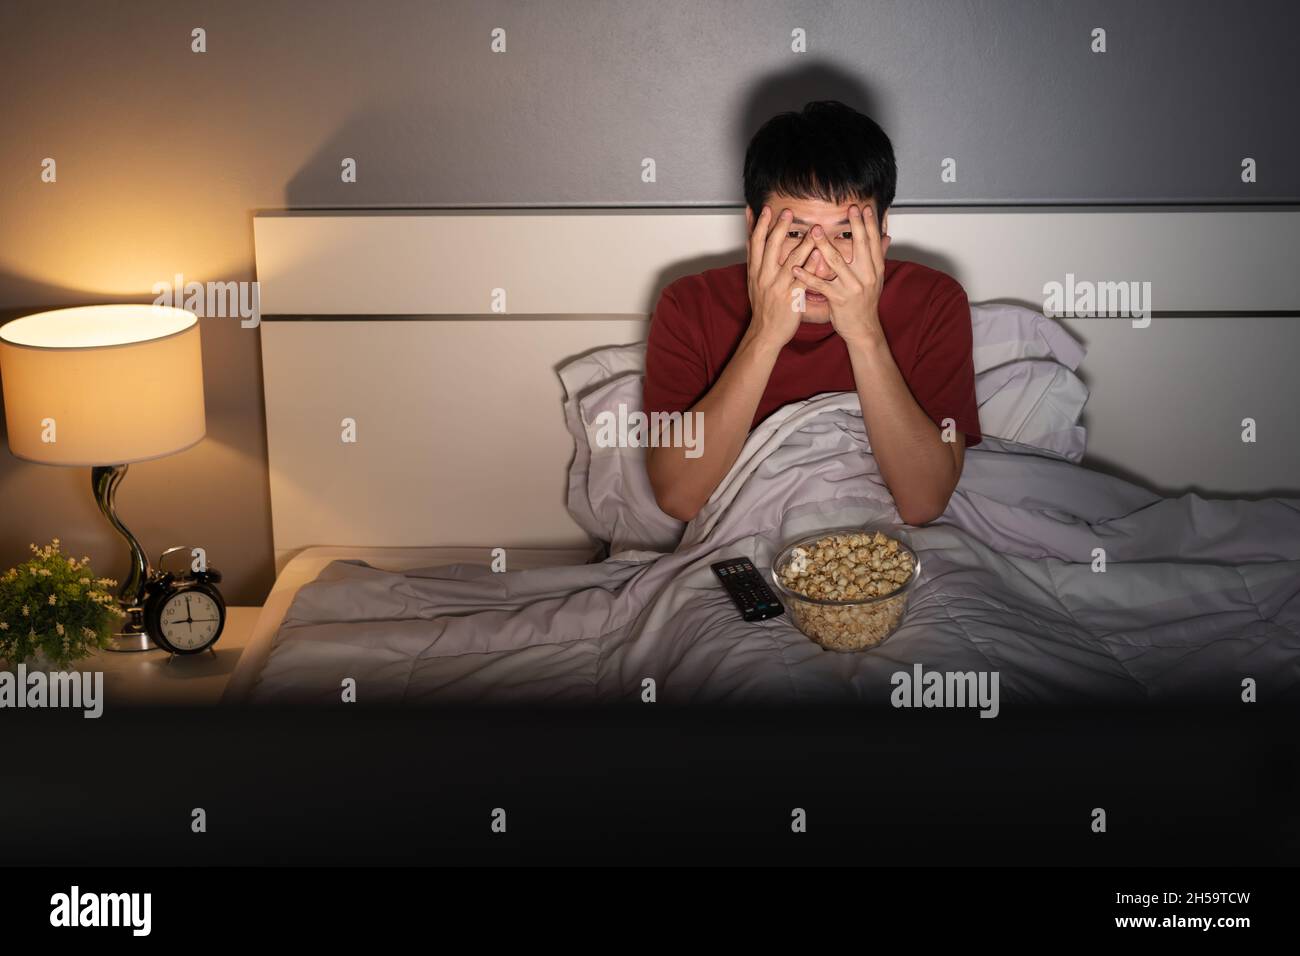 scared young man is watching horror movie TV on a bed at night Stock Photo